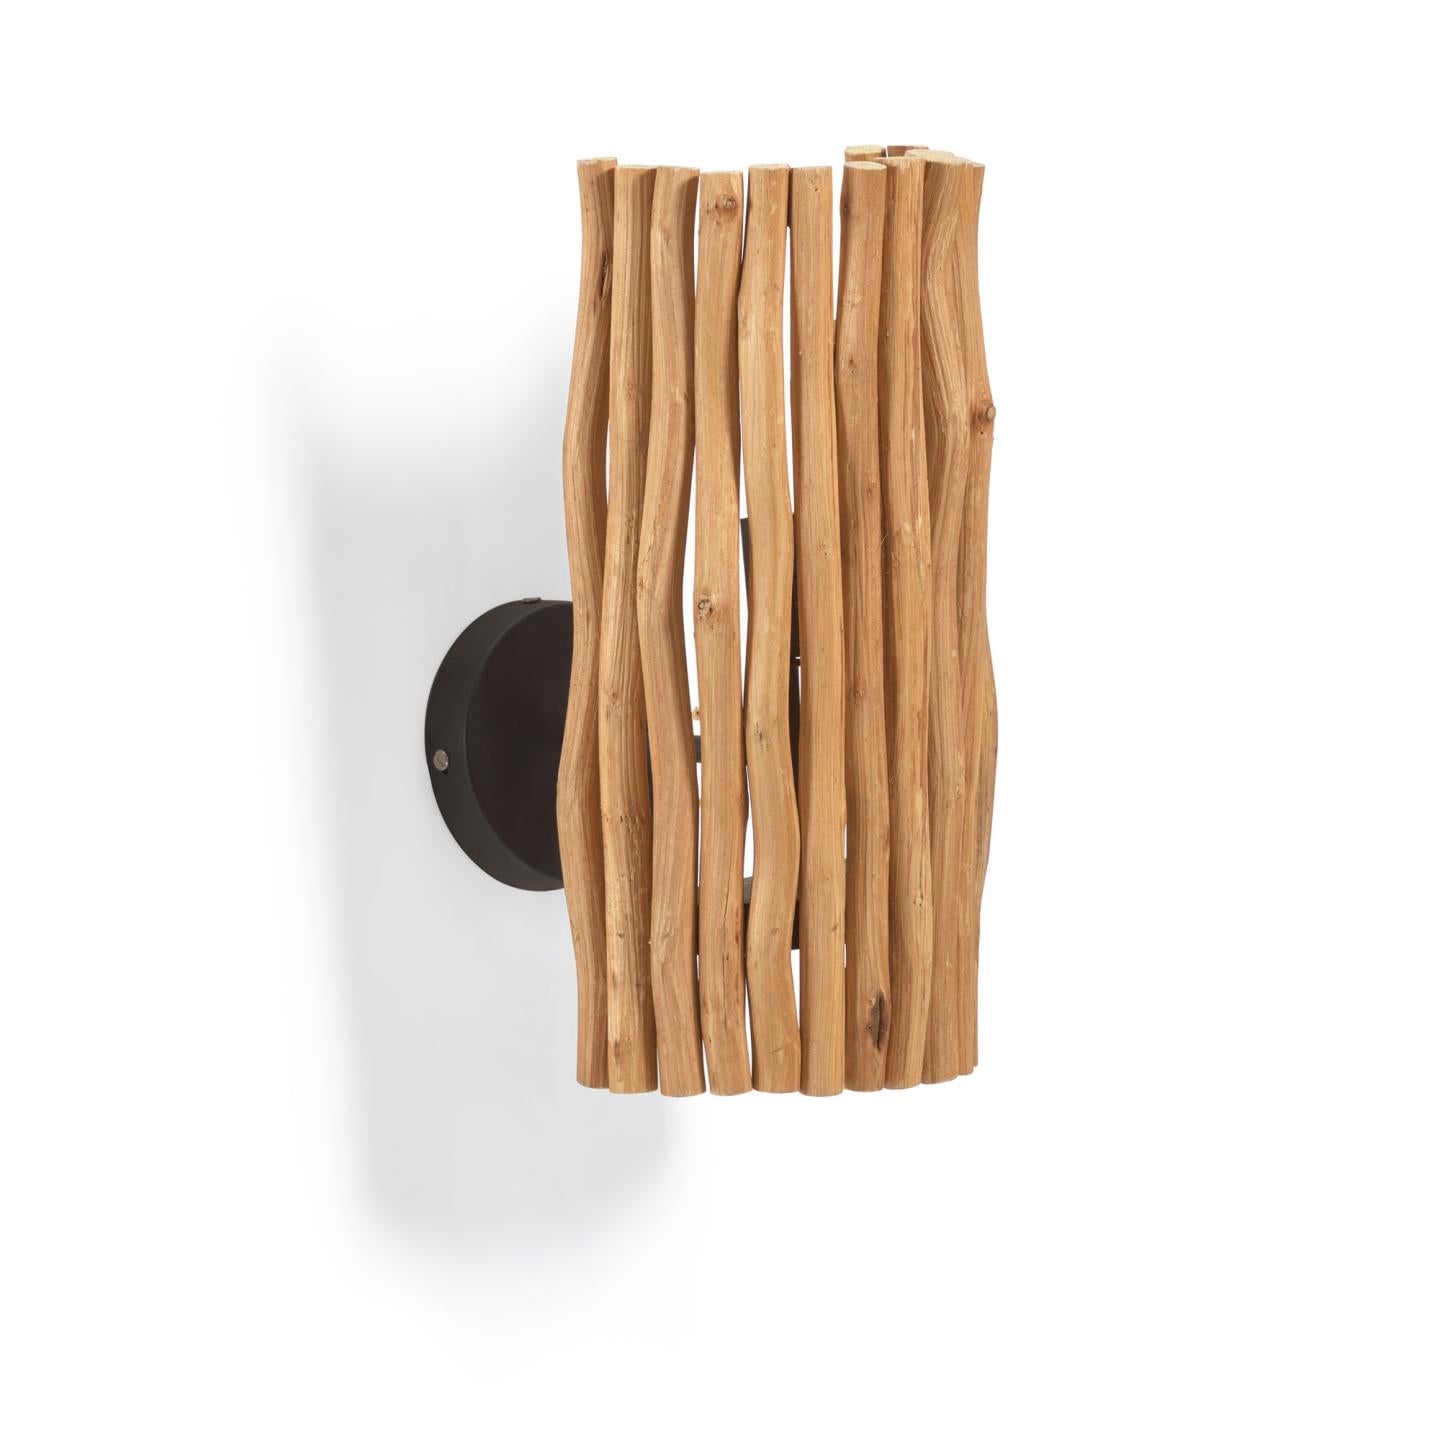 Crescencia wall lamp in a natural, aged wood design